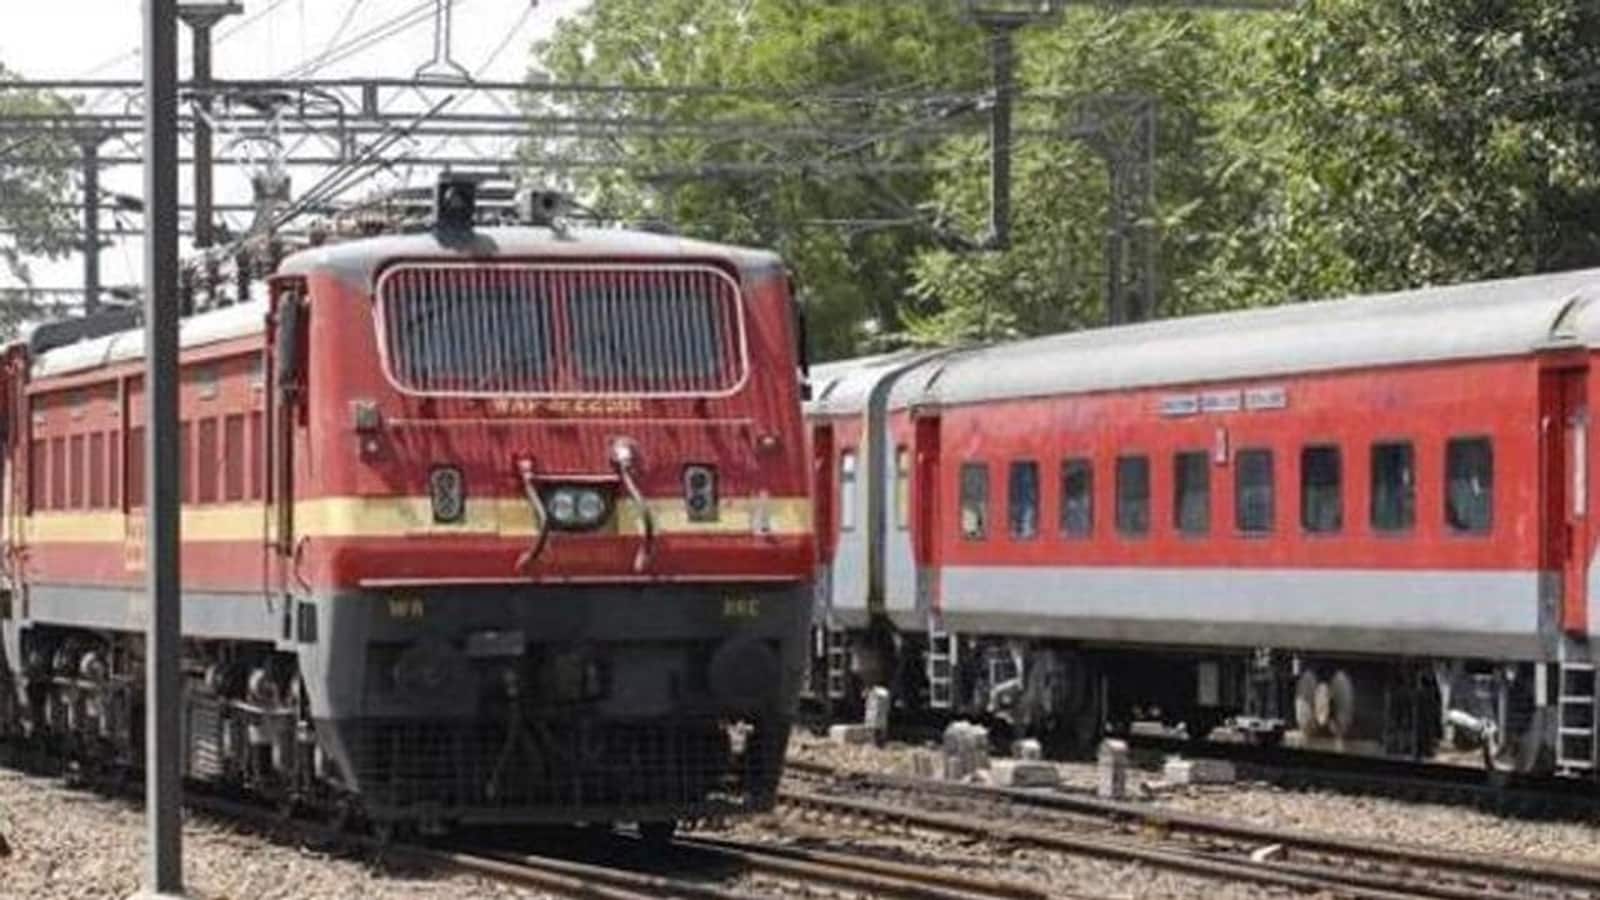 RRB Group D exam dates 2022: Exam date for CBT for level 1 posts announced